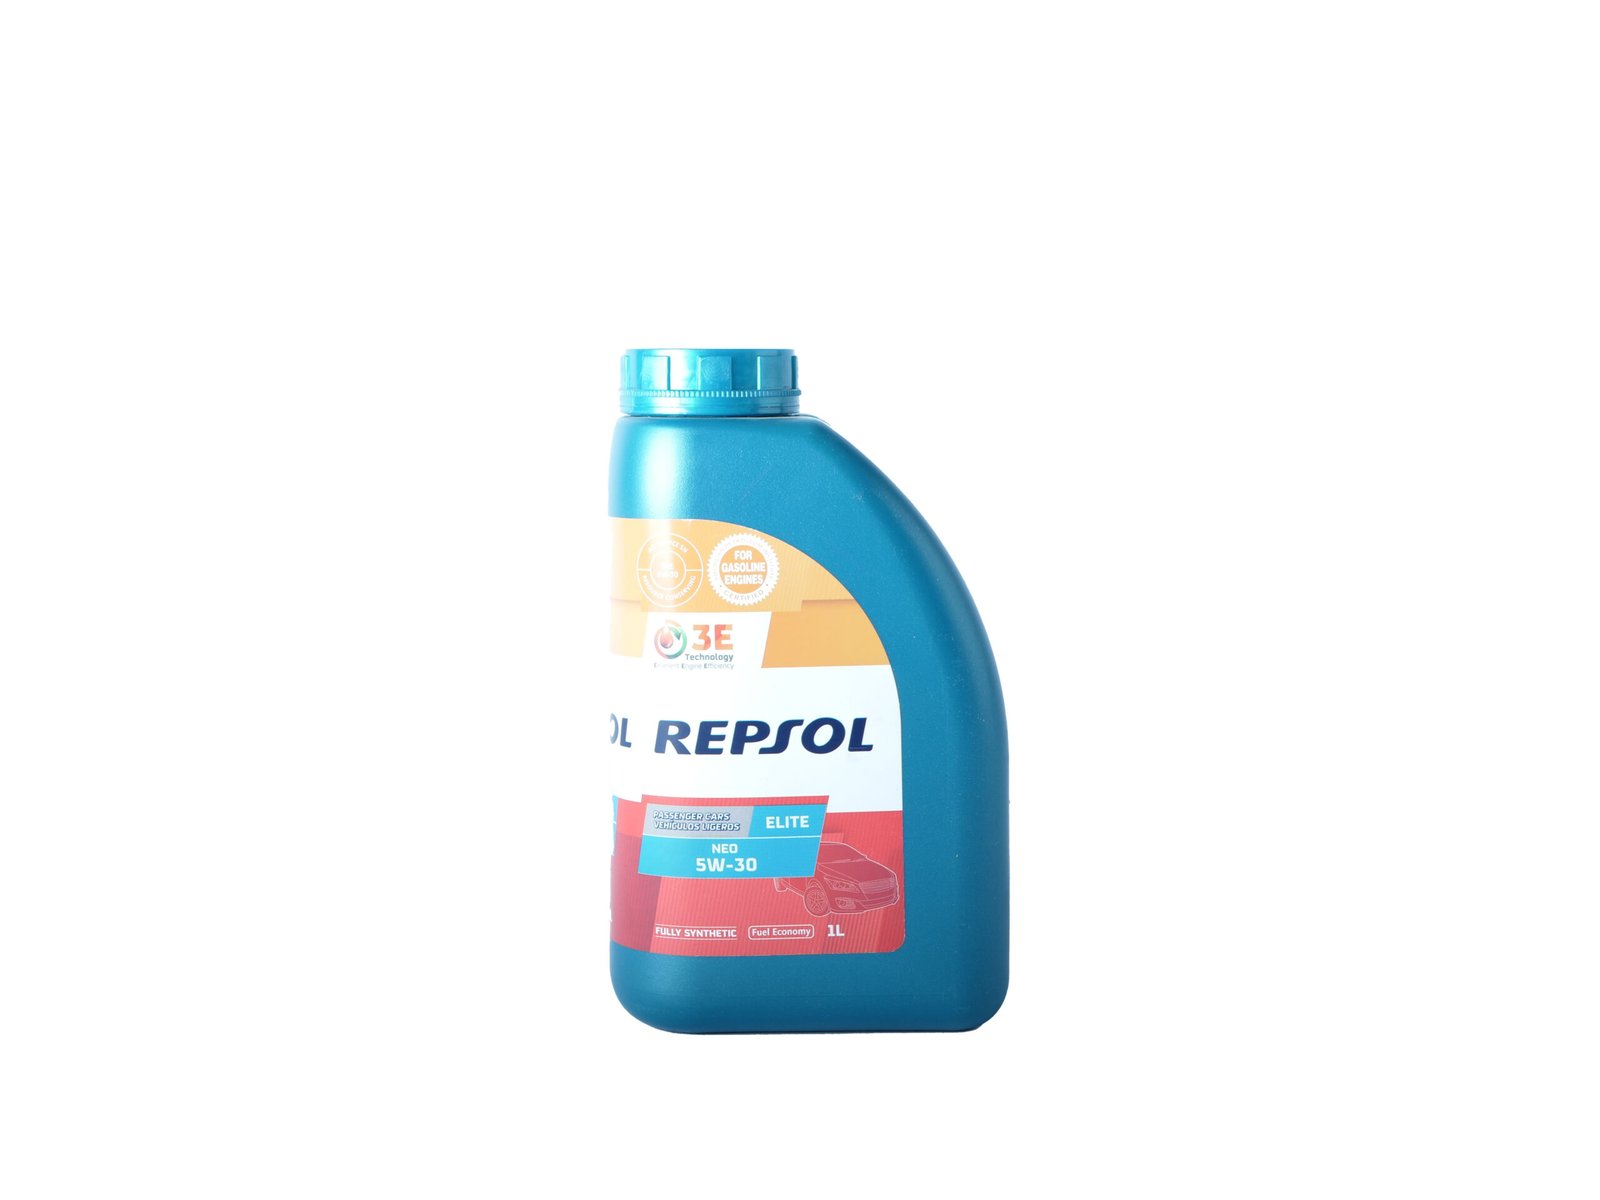 REPSOL NEO 5W30 (G) Fully Synthetic – Fuel Economy